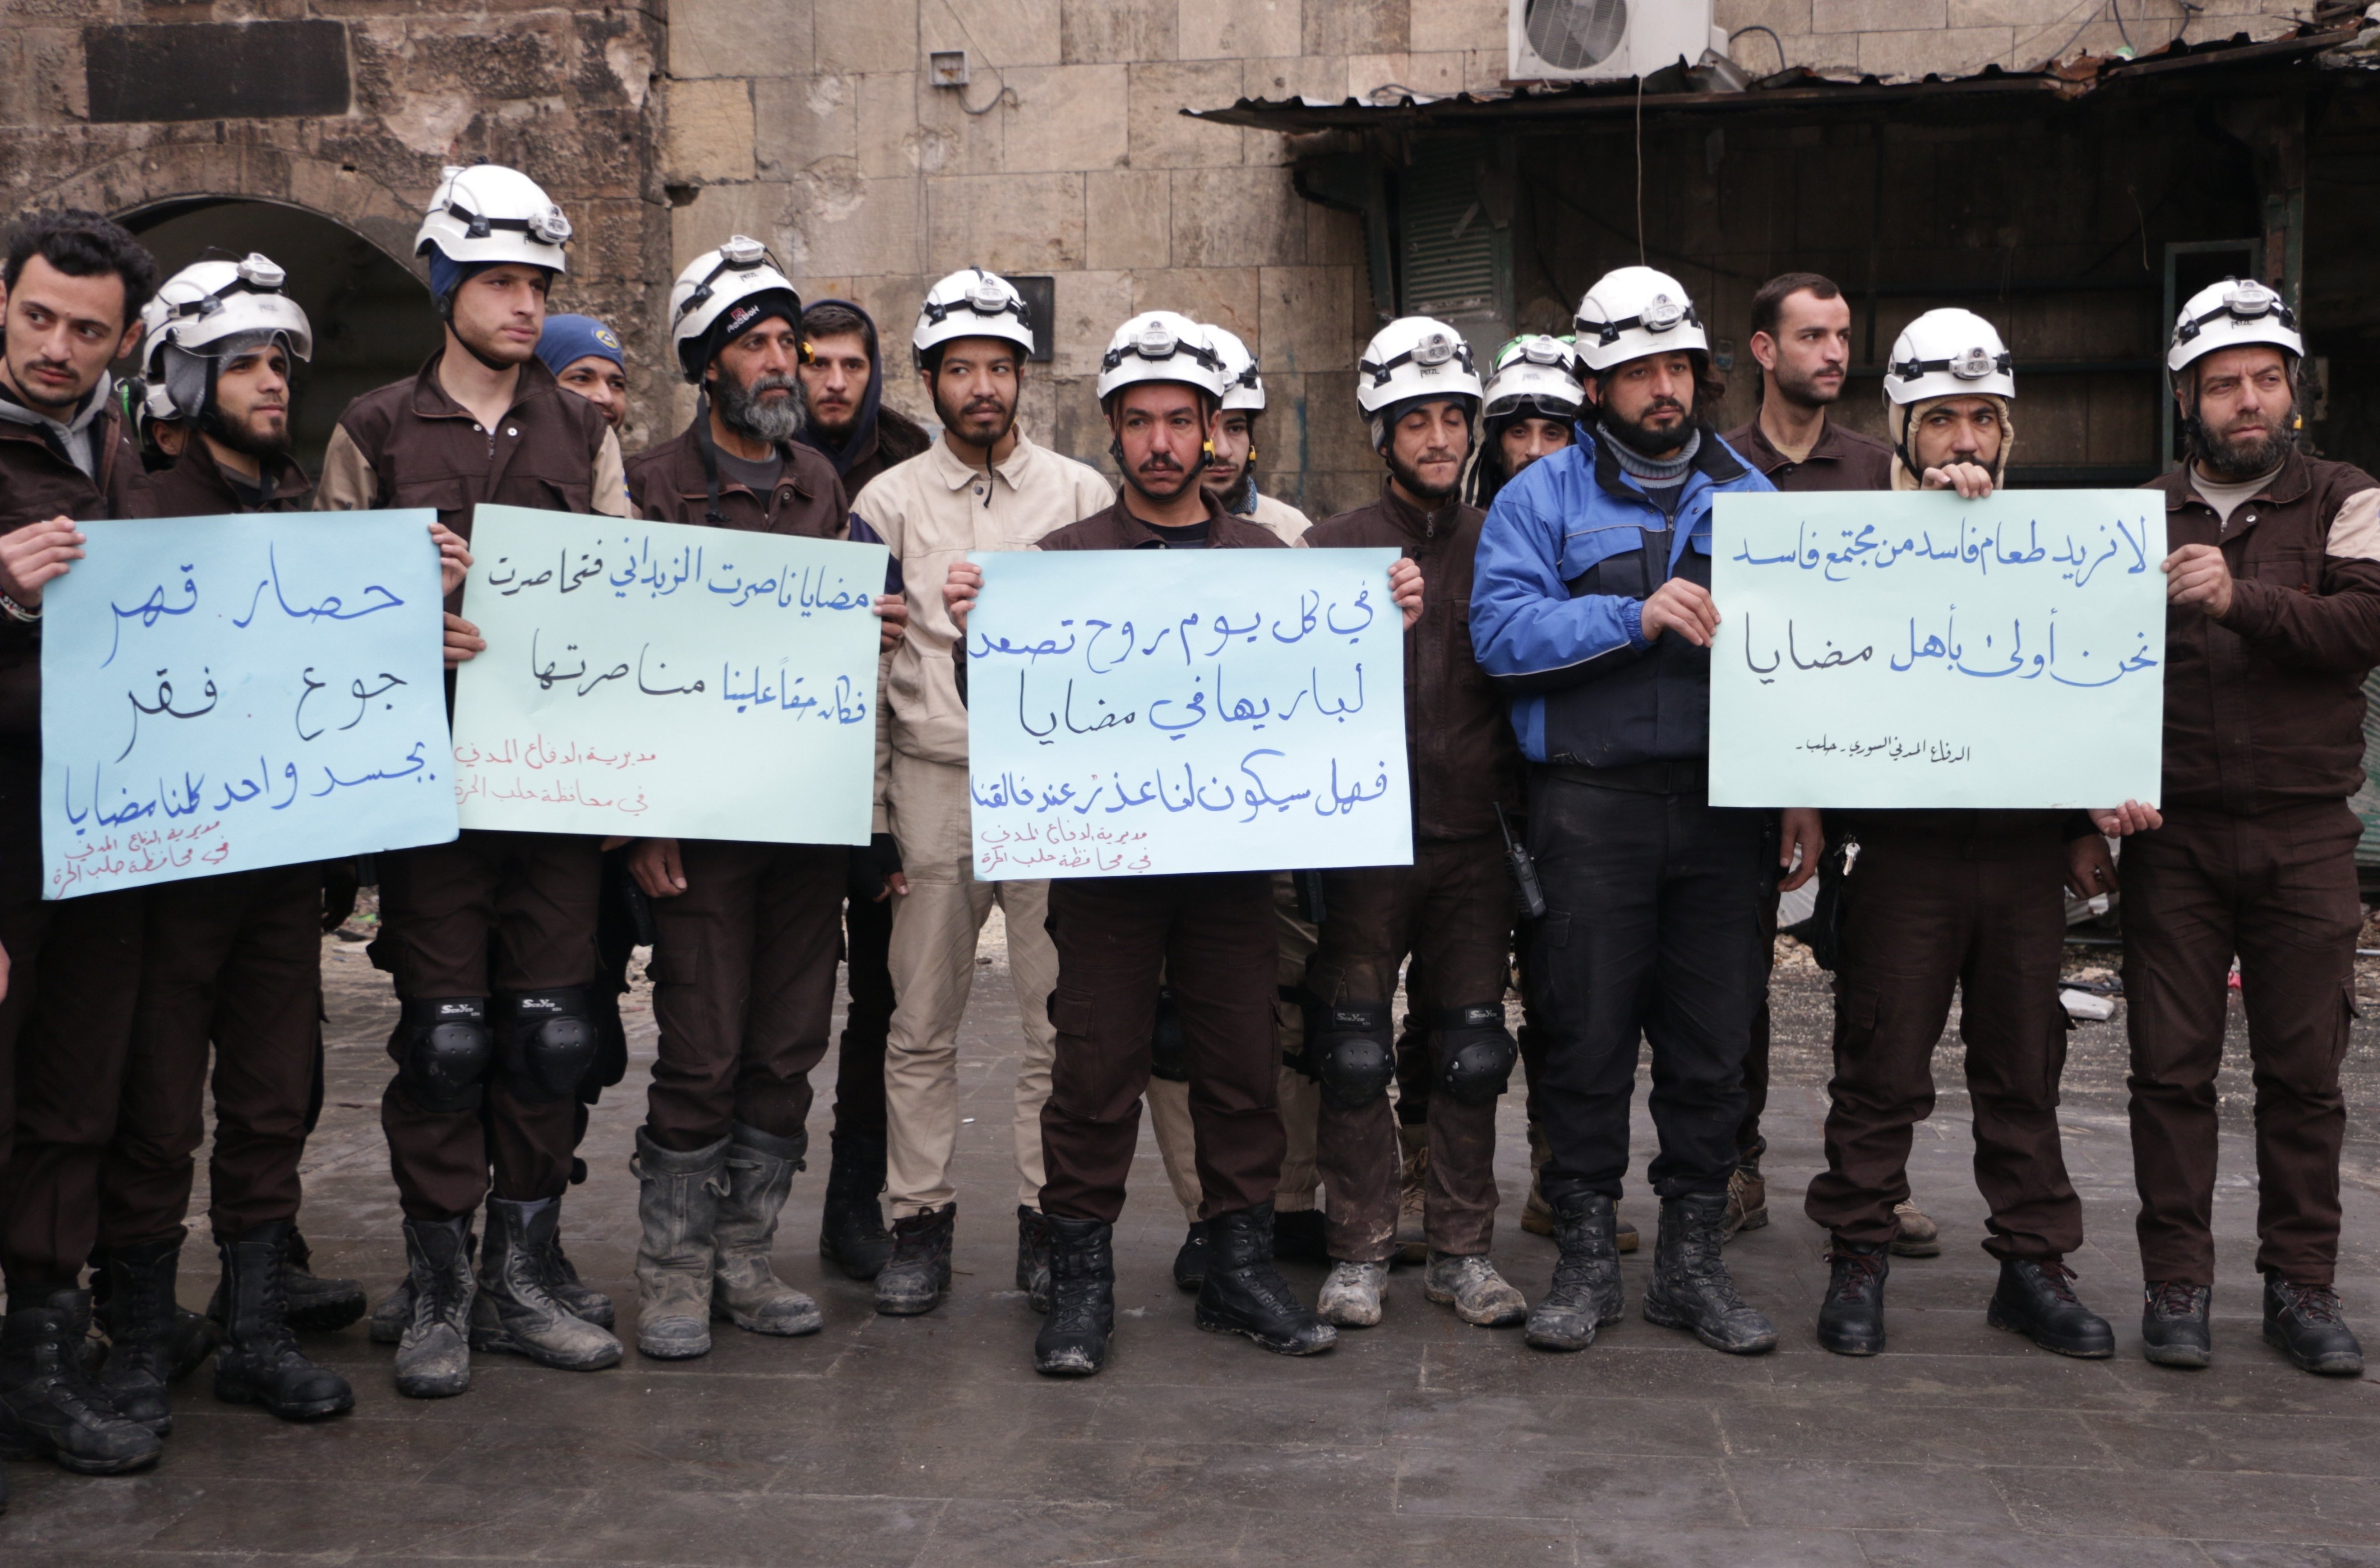 Syrian civil defense team members protest for civilians who starved to death in Madaya, Jan. 6, 2016 in Aleppo, Syria (Anadolu Agency/Getty Images)